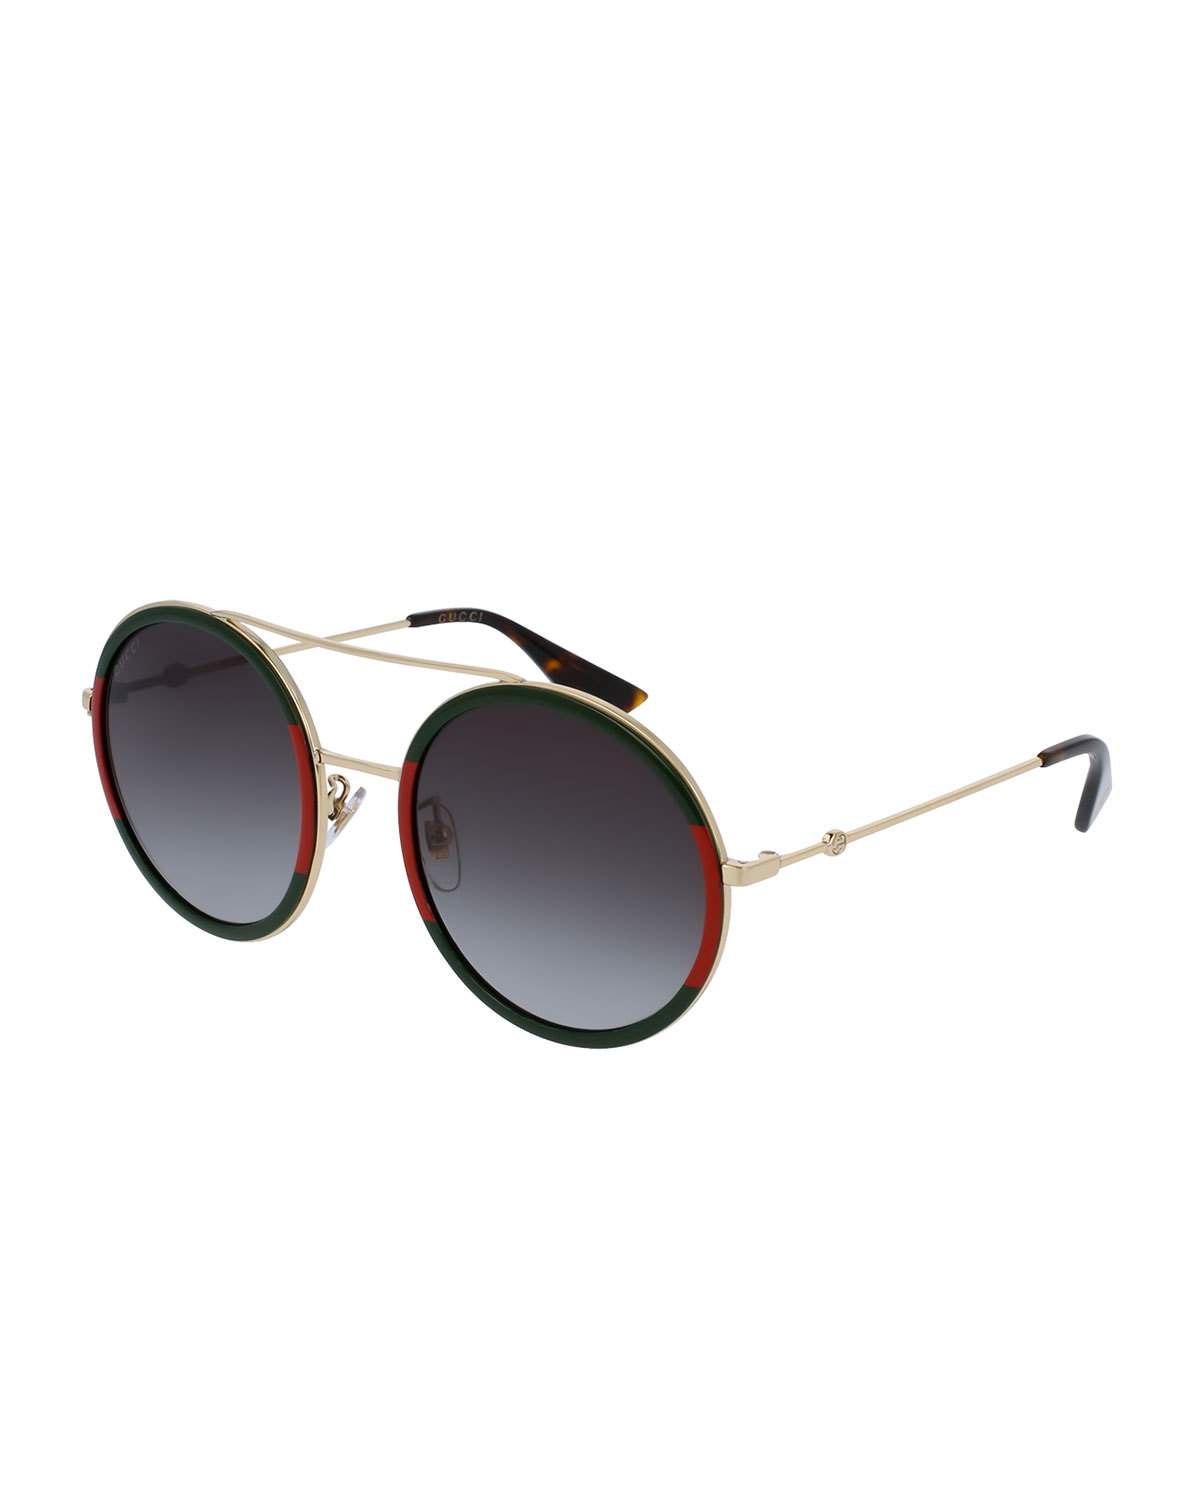 Red and Green Round Logo - Gucci Web Round Sunglasses, Green/Red/Green | Neiman Marcus